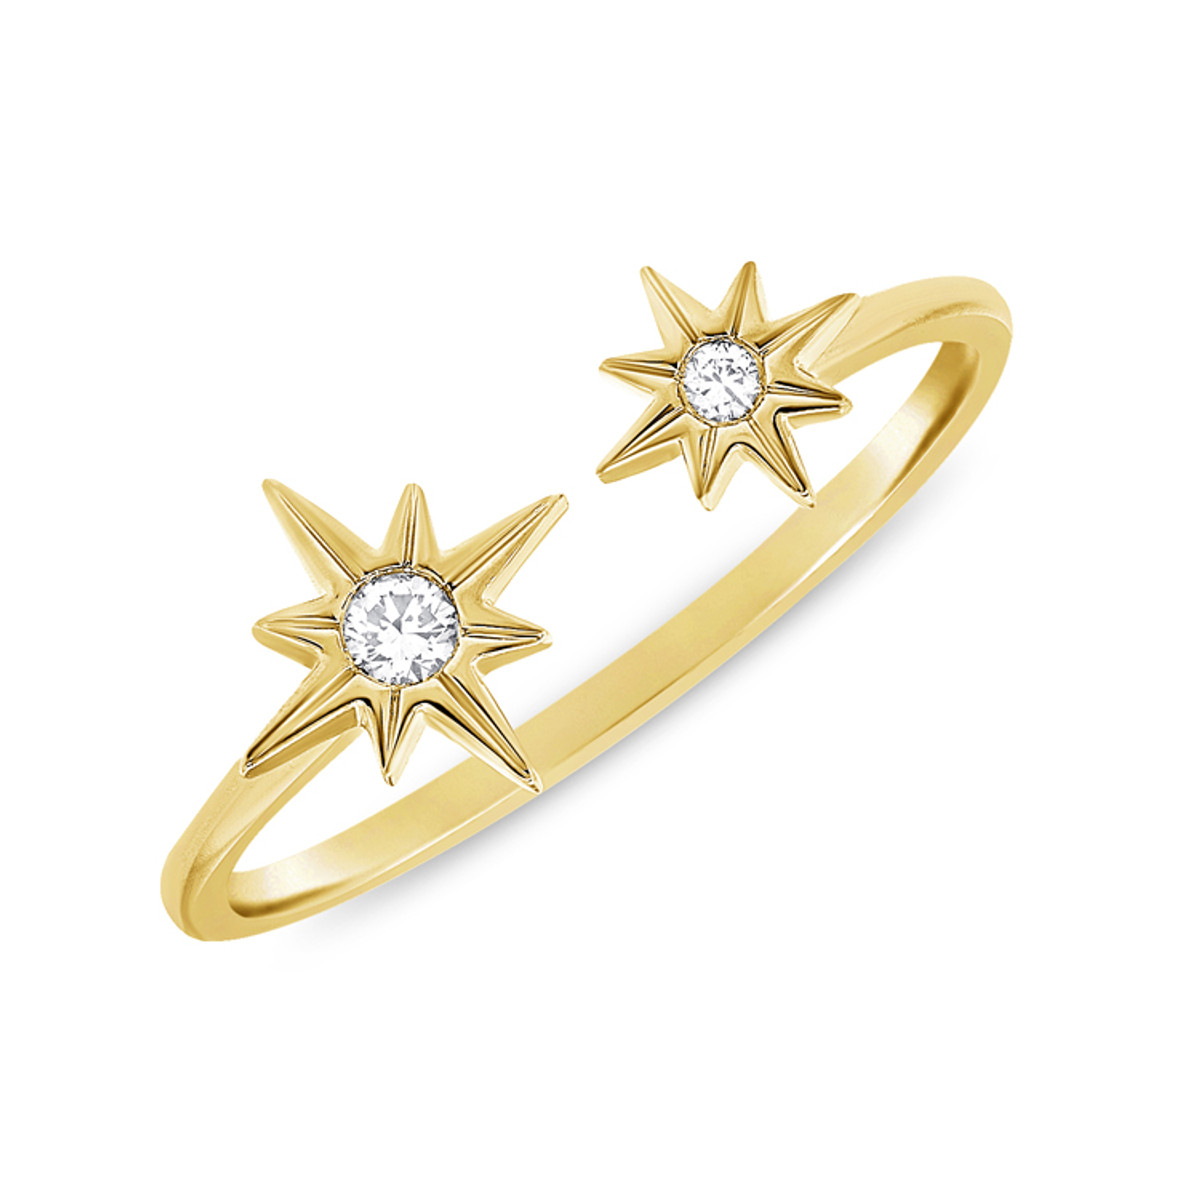 Hyde Park Collection Starburst Open Diamond Ring-DCST1837 Product Image